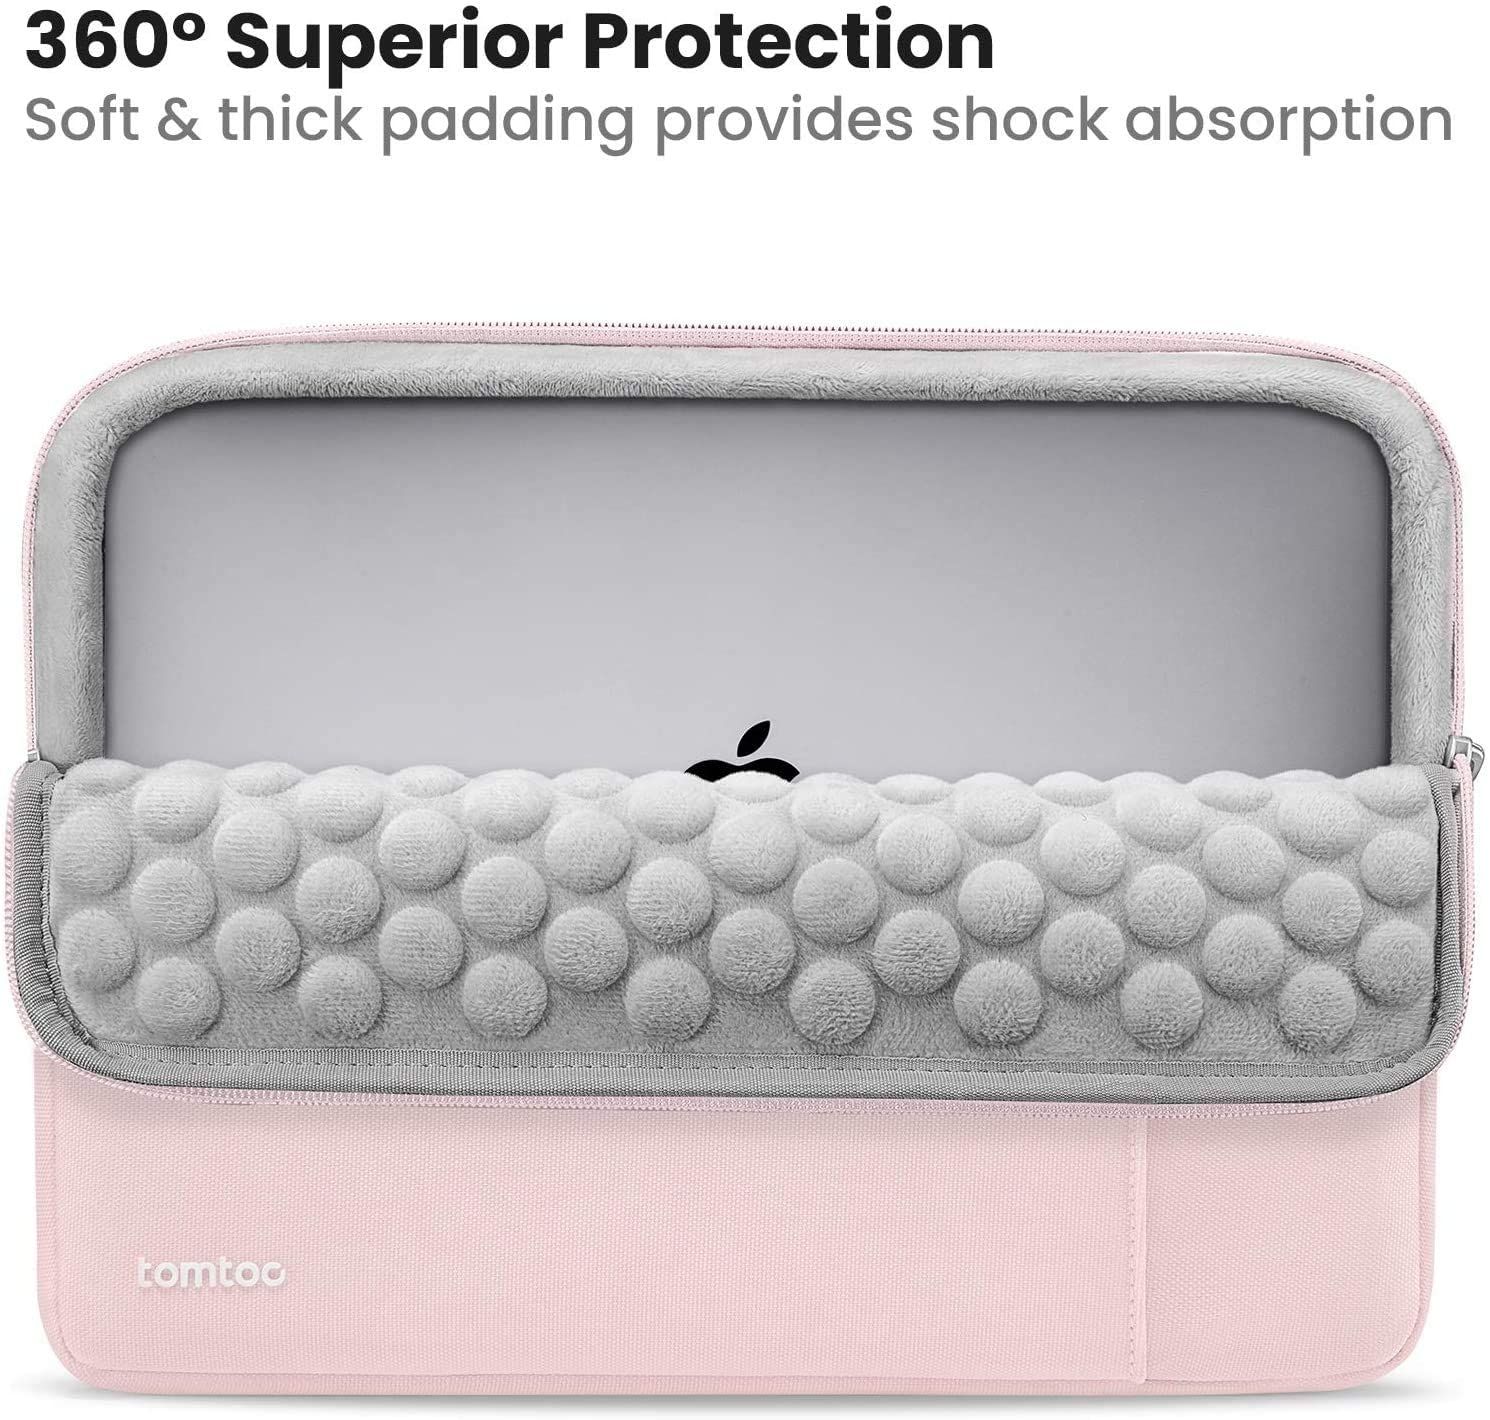 tomtoc-360-protective-laptop-sleeve-thiki-versatile-a13-gia-macbook-air-pro-13-baby-pink-2.jpg